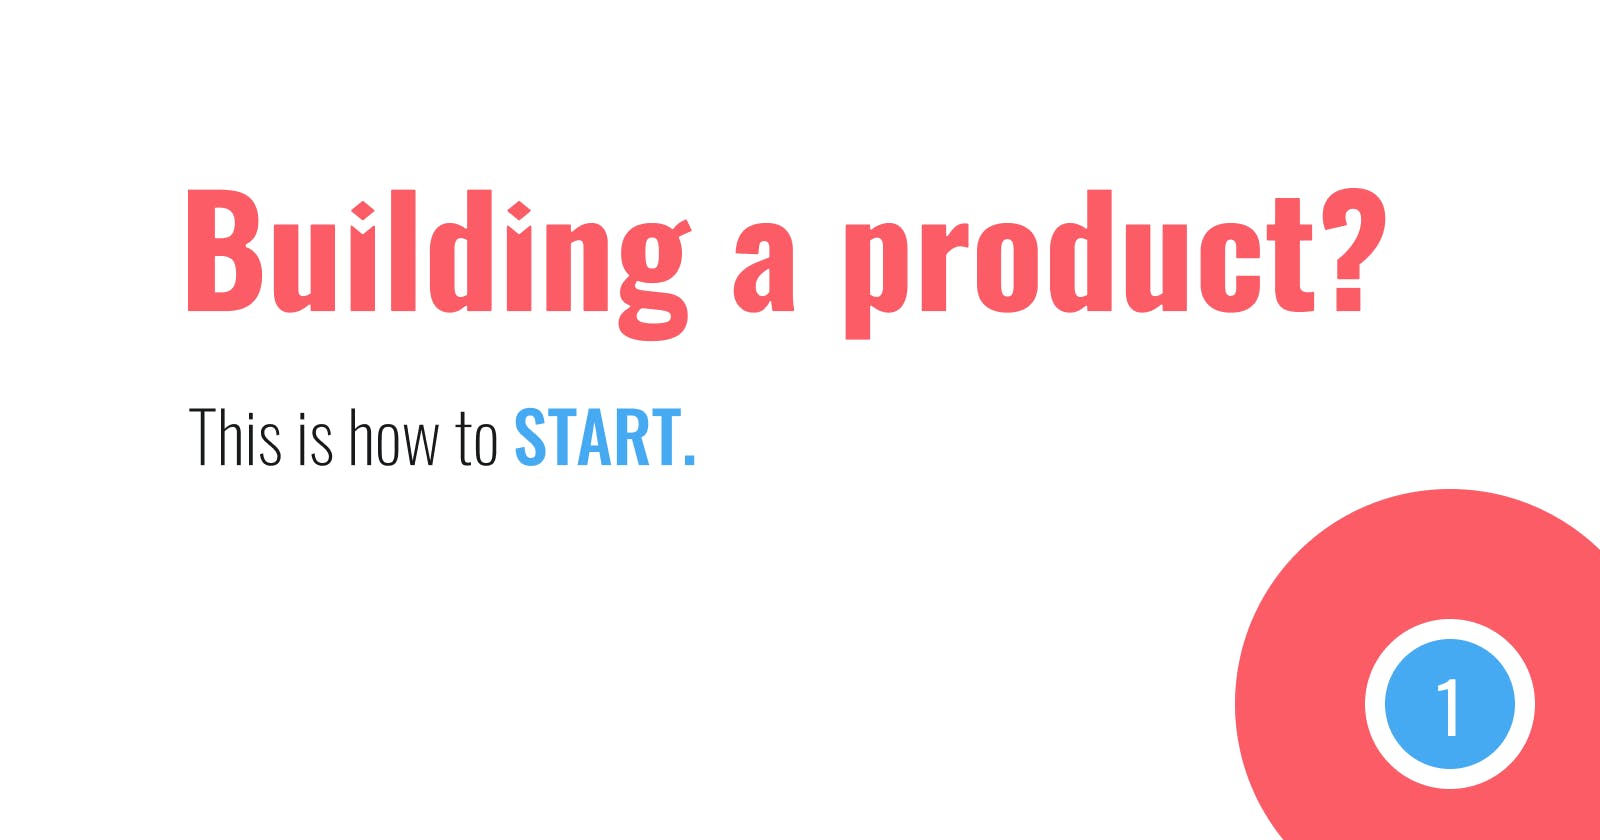 Building a product? This is how to start.